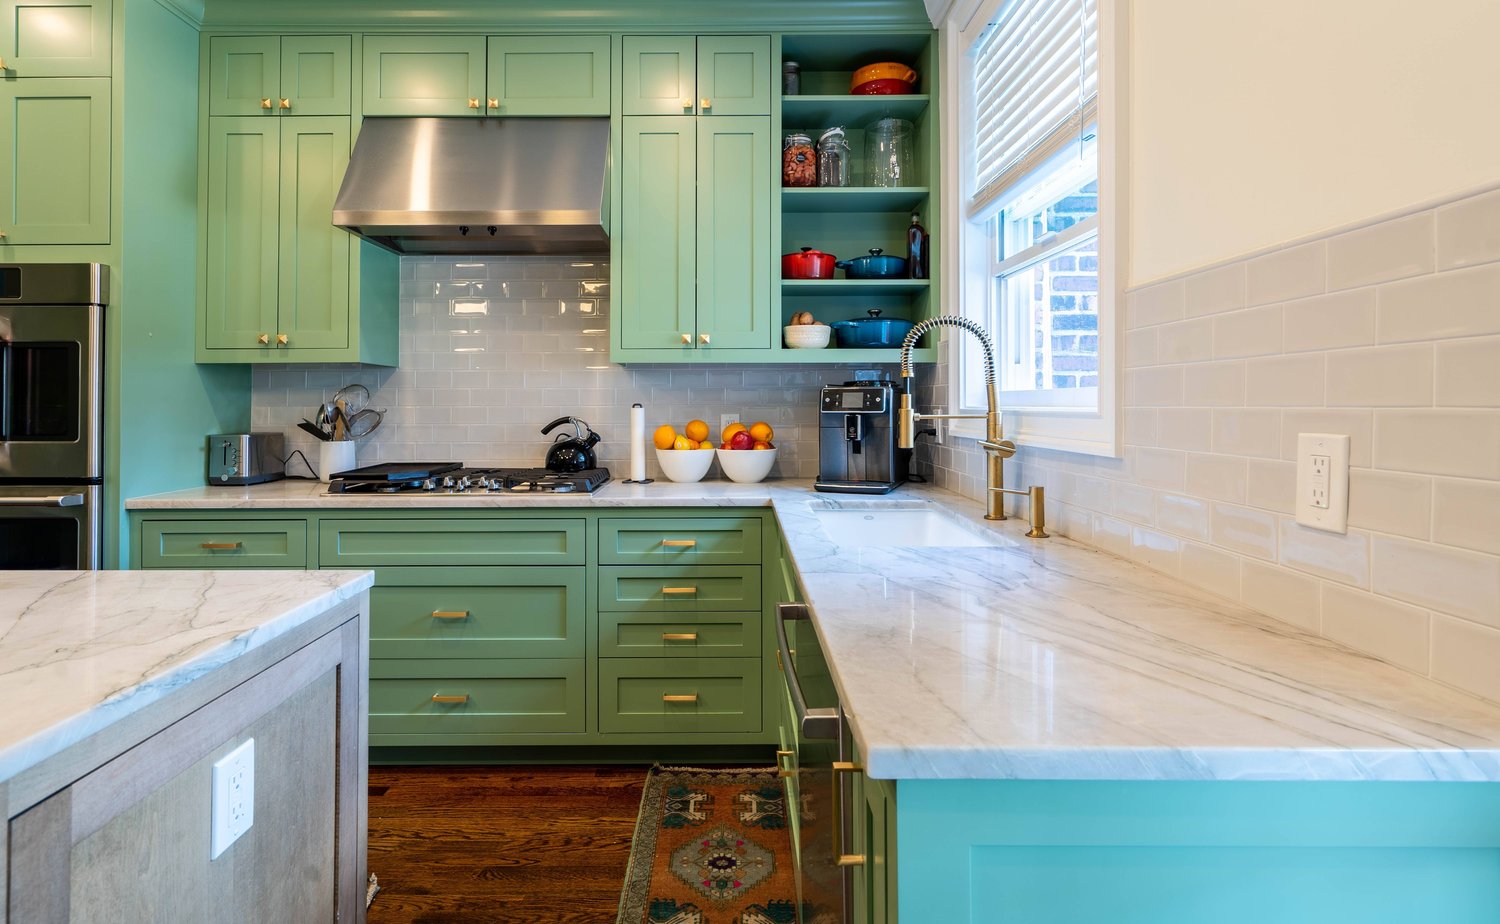 Kitchens with Color, but not Avocado Green